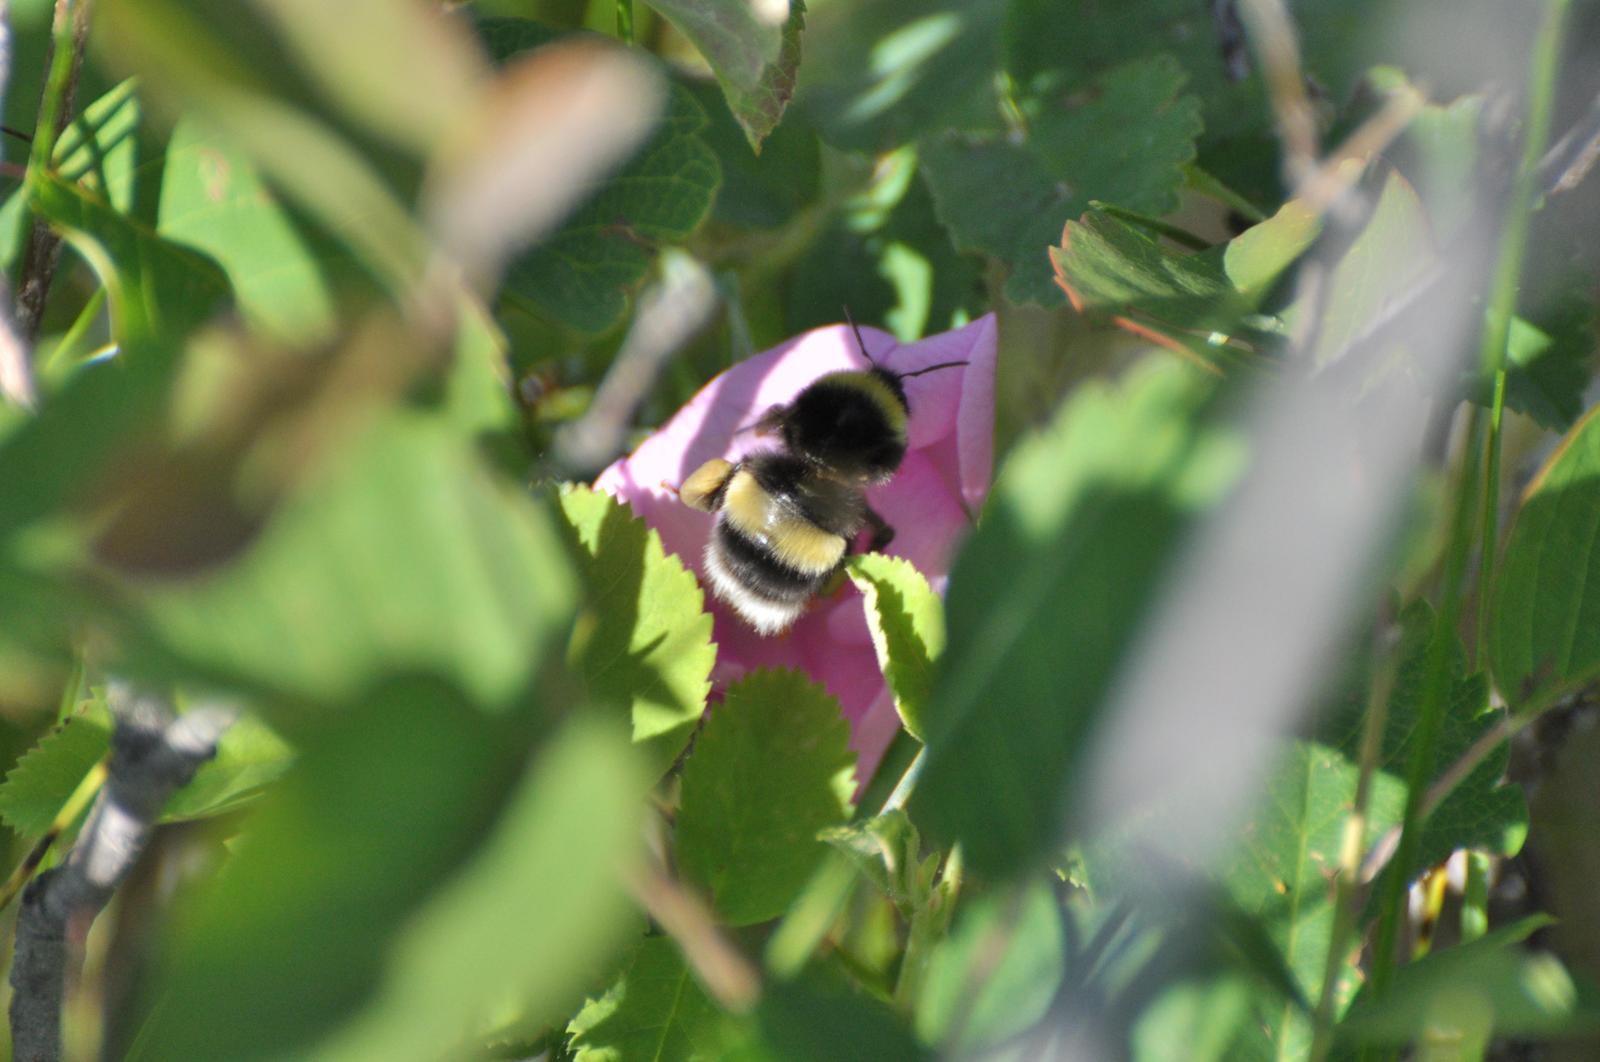 Cryptic bumble bee Photo by Sarah Johnson